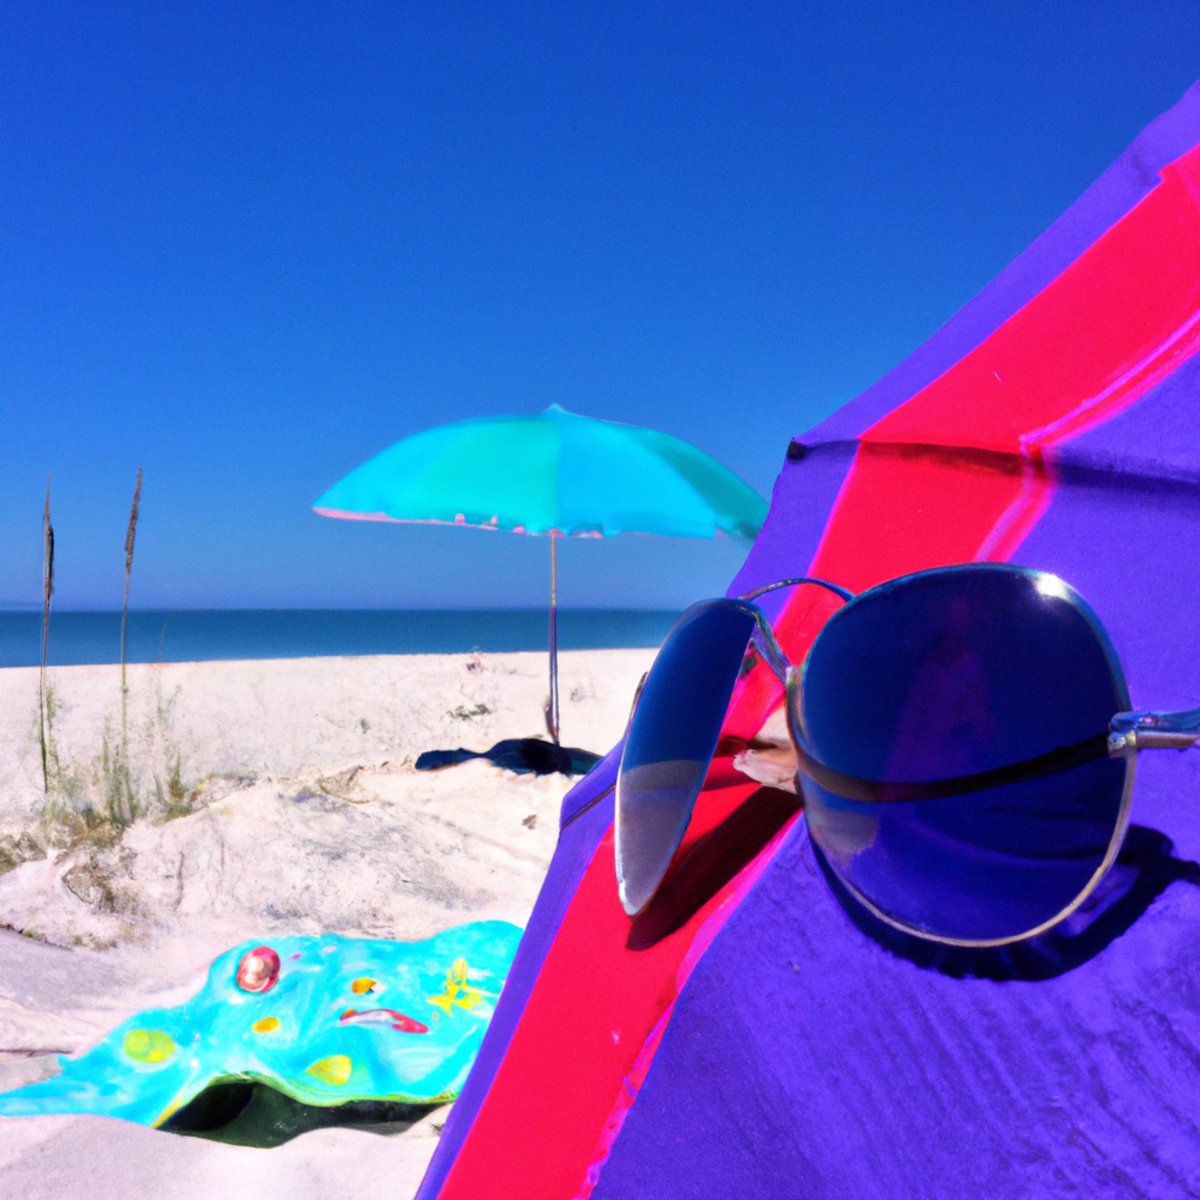 Vibrant beach umbrella and sunglasses on sandy beach with clear blue sky and gentle waves - Cockayne Syndrome